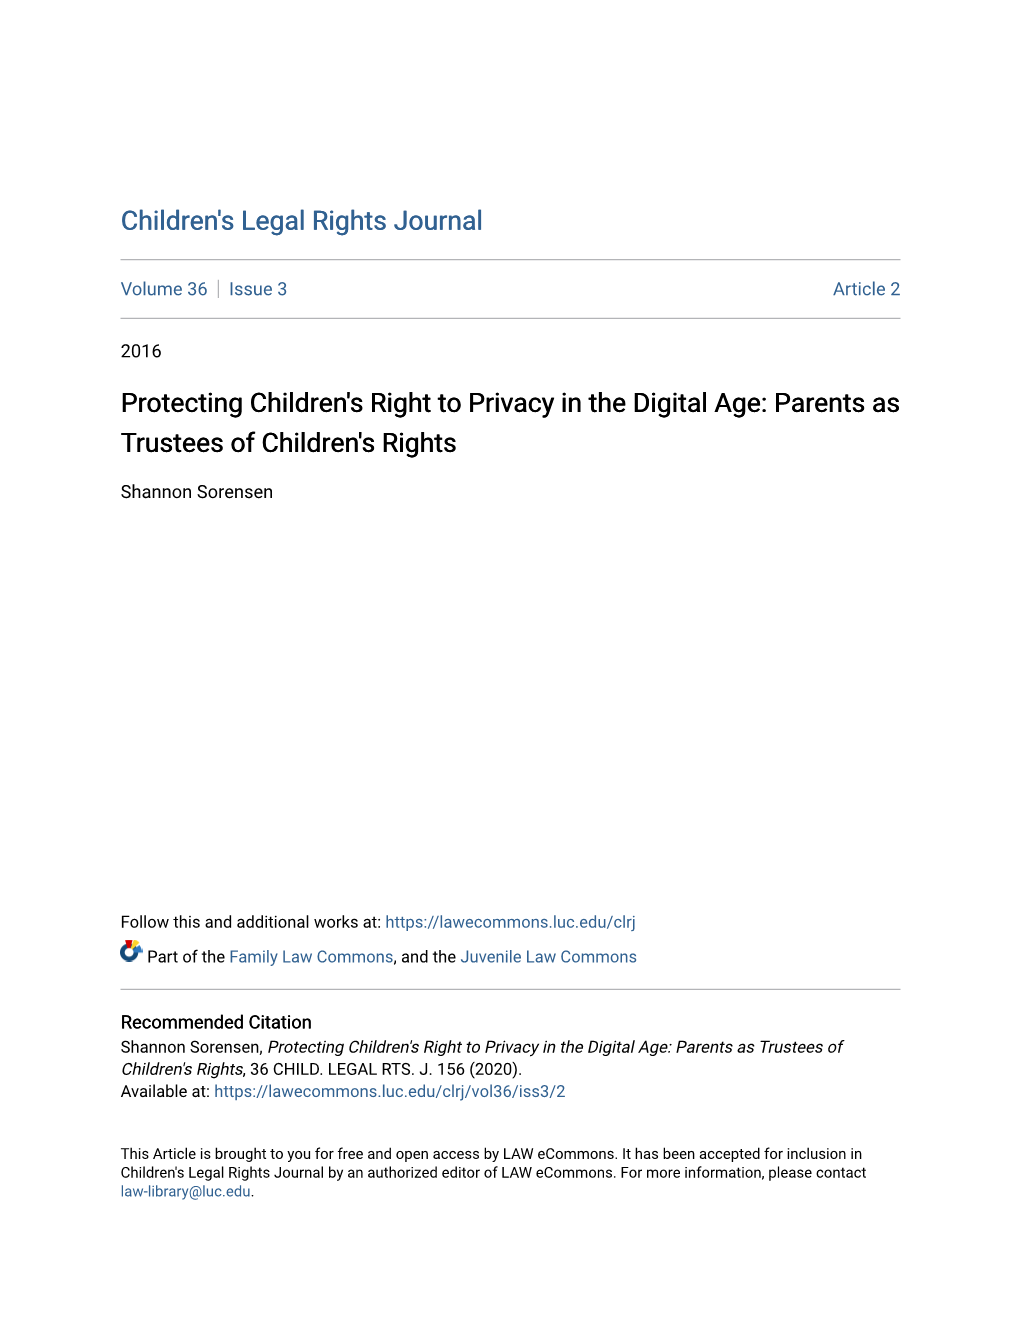 Protecting Children's Right to Privacy in the Digital Age: Parents As Trustees of Children's Rights